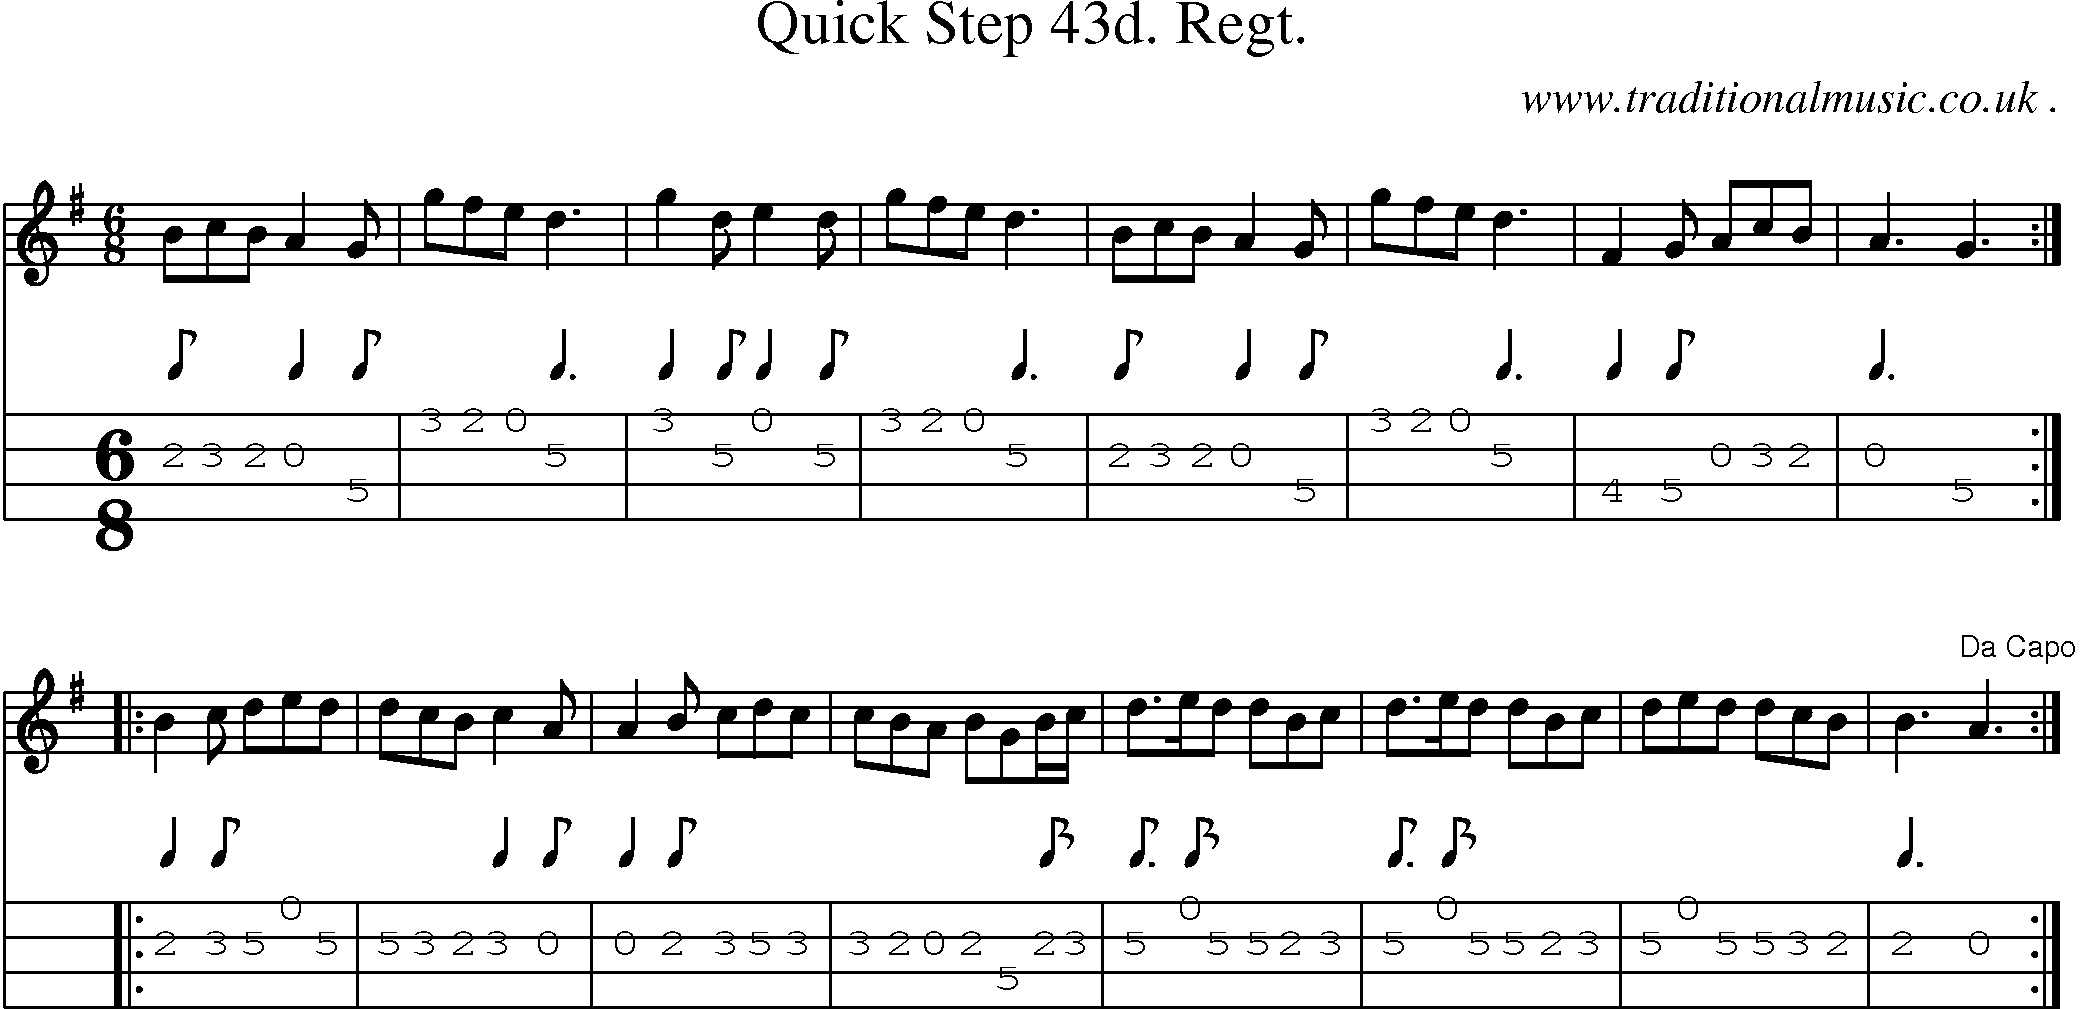 Sheet-music  score, Chords and Mandolin Tabs for Quick Step 43d Regt